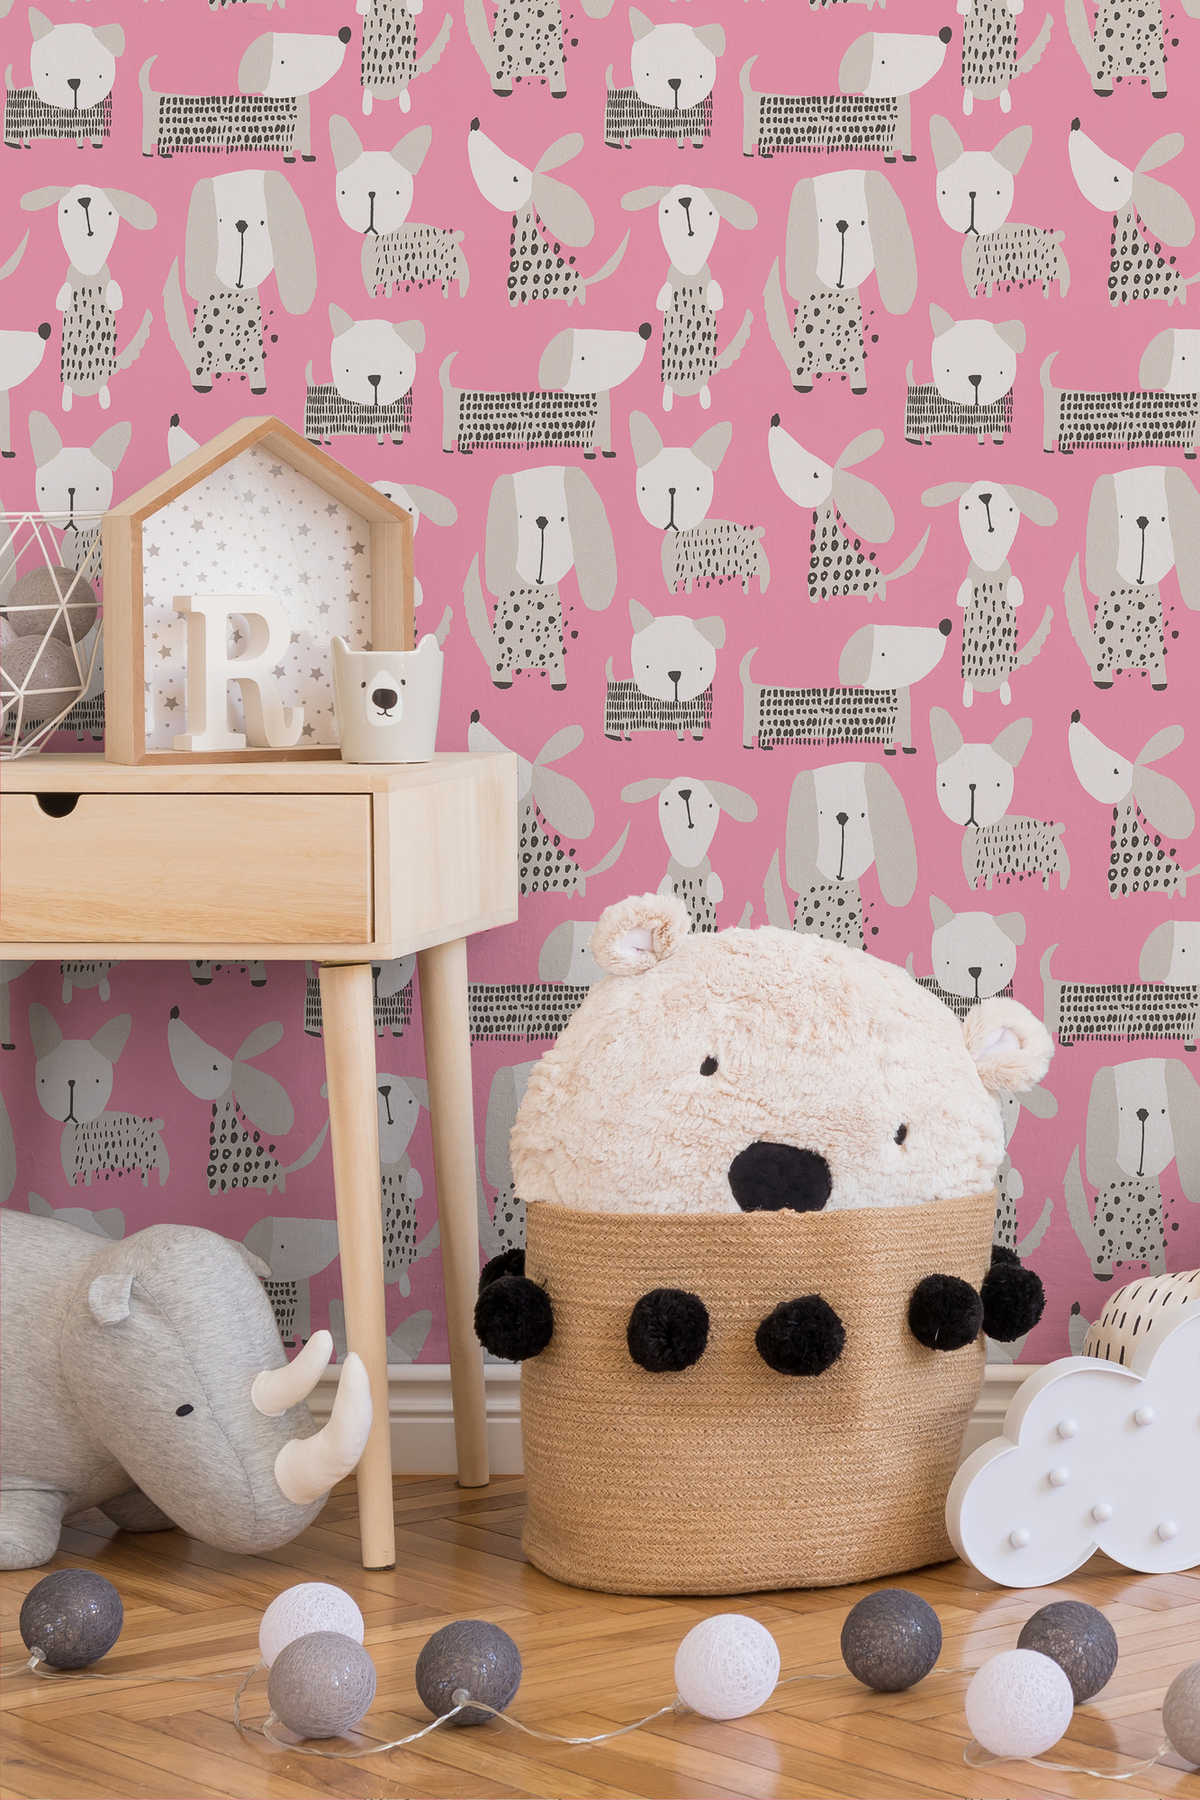             Dog wallpaper in cartoon style for Nursery - pink, white
        